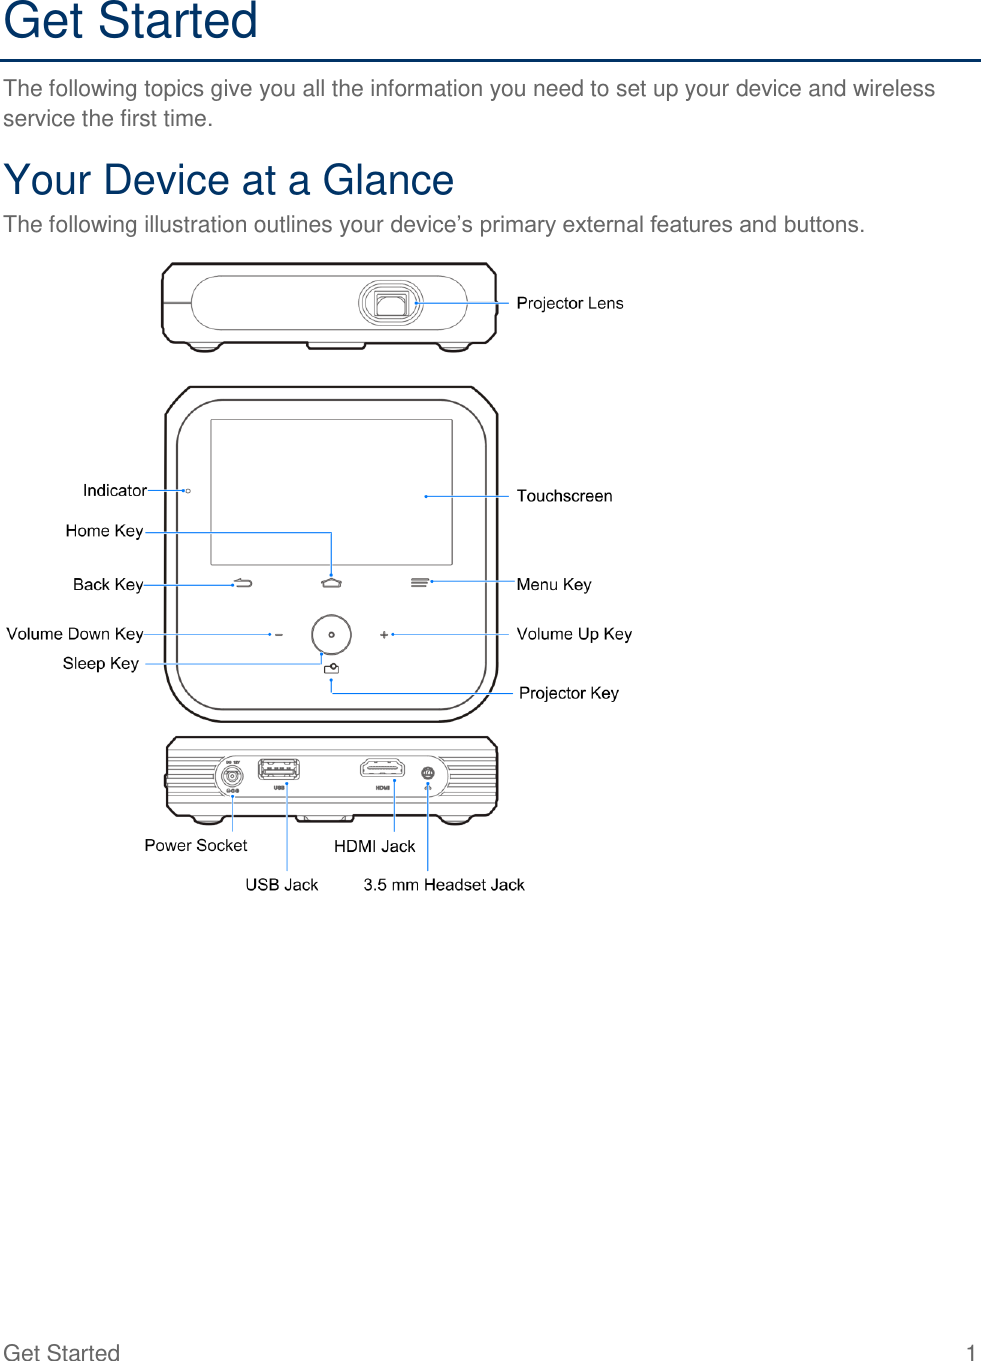  Get Started  1 Get Started The following topics give you all the information you need to set up your device and wireless service the first time. Your Device at a Glance The following illustration outlines your device’s primary external features and buttons.  